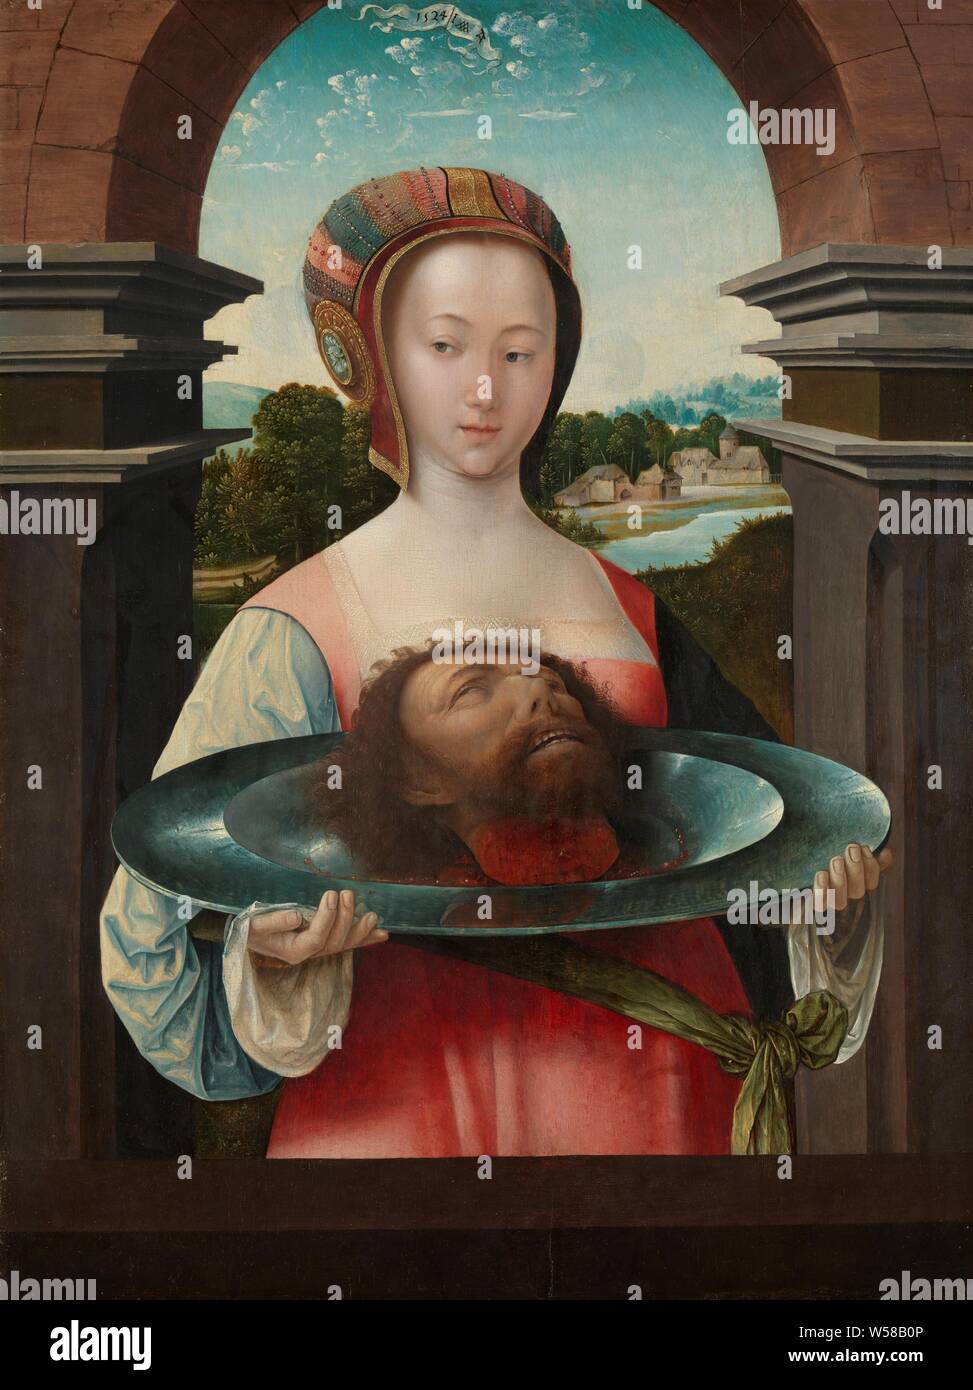 Salome with the Head of John the Baptist Salome and the Head of John the Baptist, Salome with the head of John the Baptist on a large round tin dish. Standing under an arch, in the distance a landscape with farms on a river, the head of John the Baptist on a platter, Jacob Cornelisz van Oostsanen, Amsterdam, 1524, panel, oil paint (paint), support: h 71.8 cm × w 53.6 cm frame: h 83.8 cm × w 66.5 cm × t 5.5 cm Stock Photo